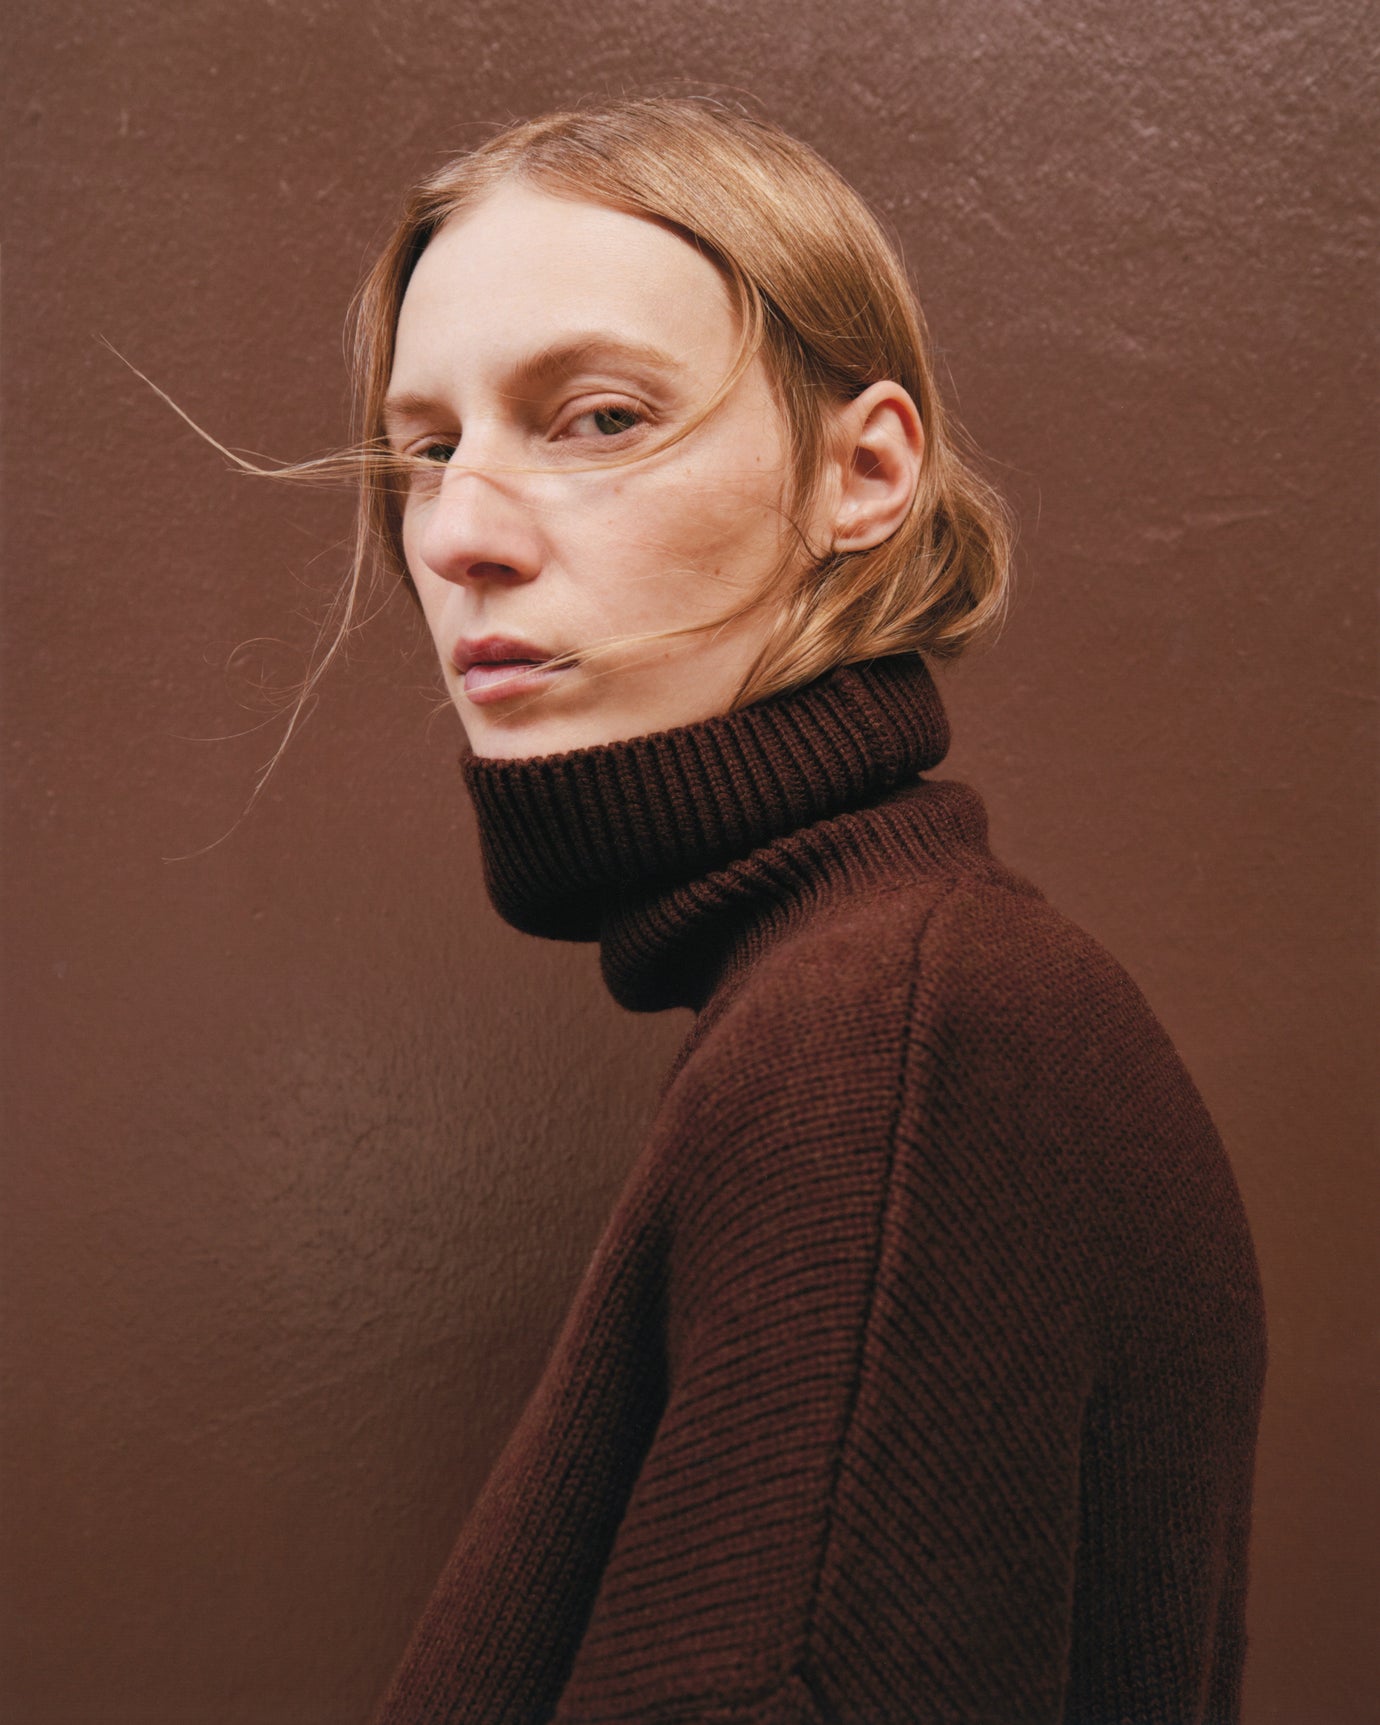 Model Julia Nobis photographed by Anthony Seklaoui in the Rhea sweater